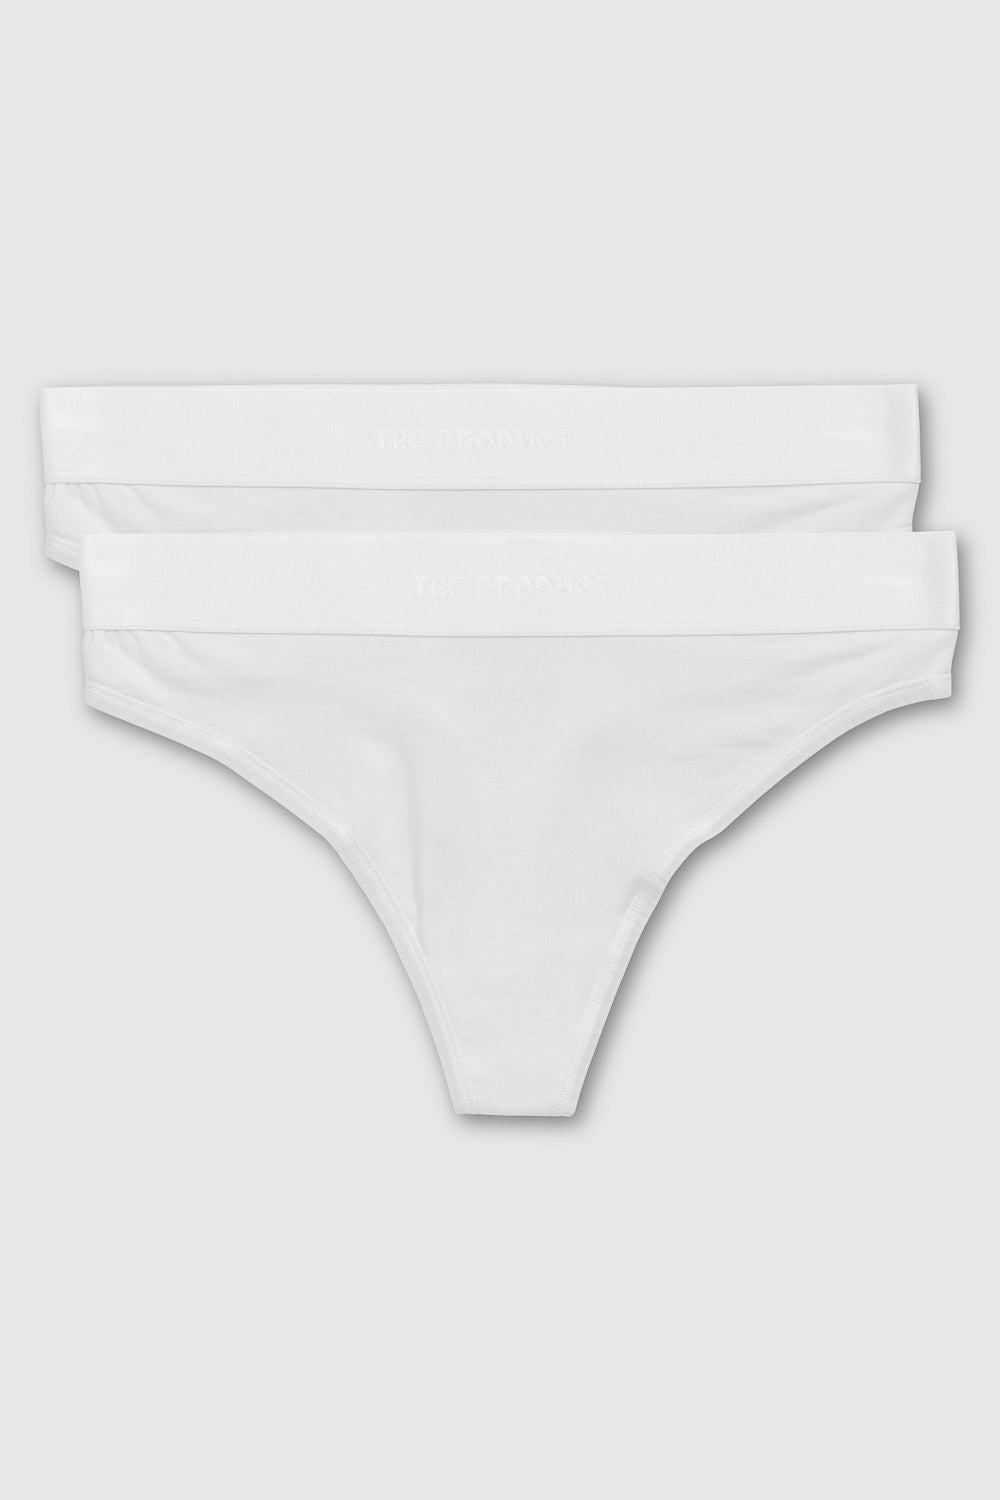 Women's Thong 2-Pack – The Product